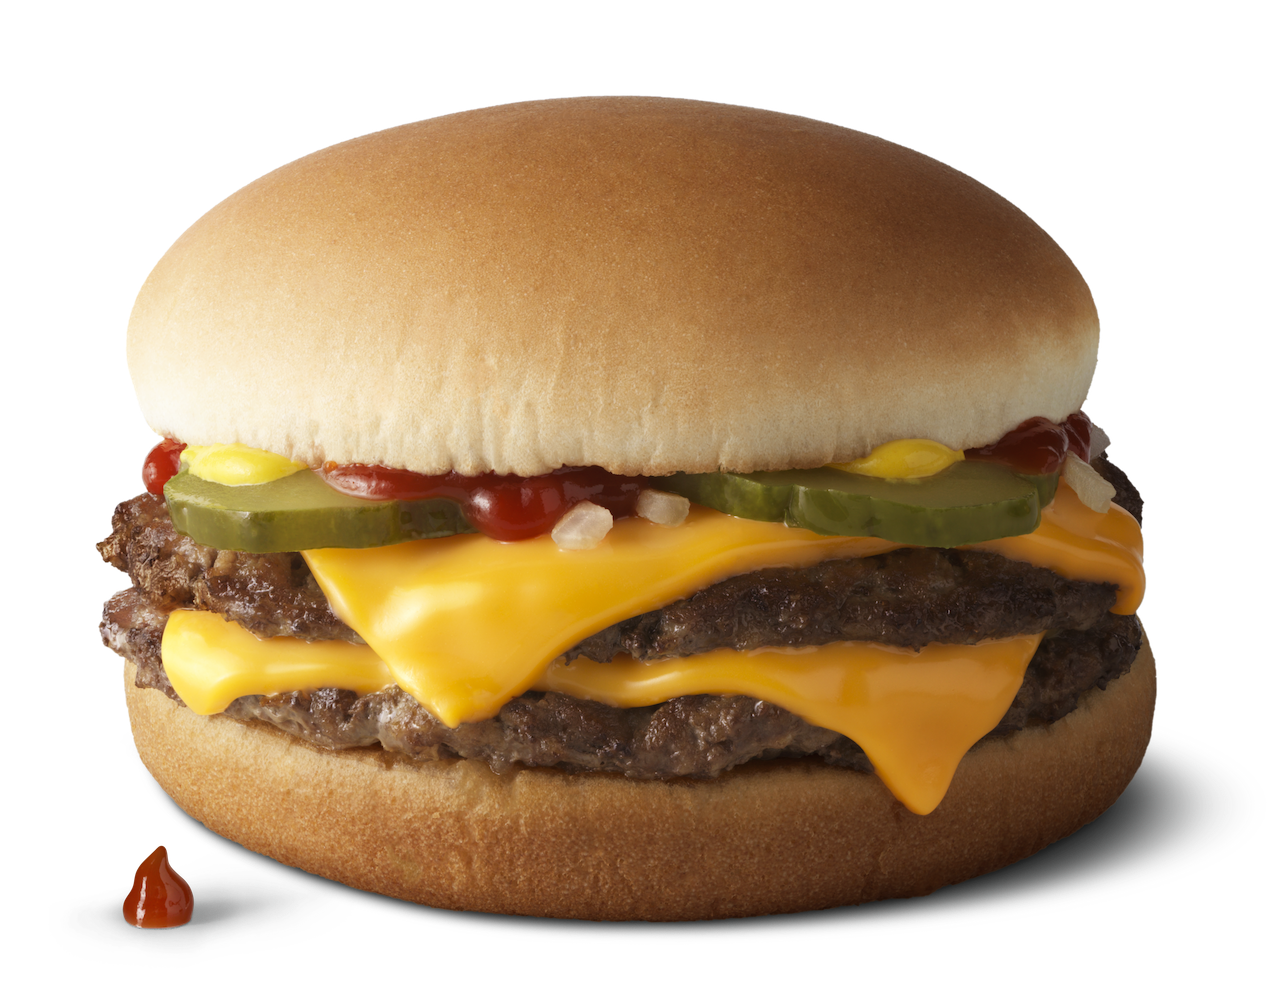 Celebrate National Cheeseburger Day with a FREE McDonald’s Double